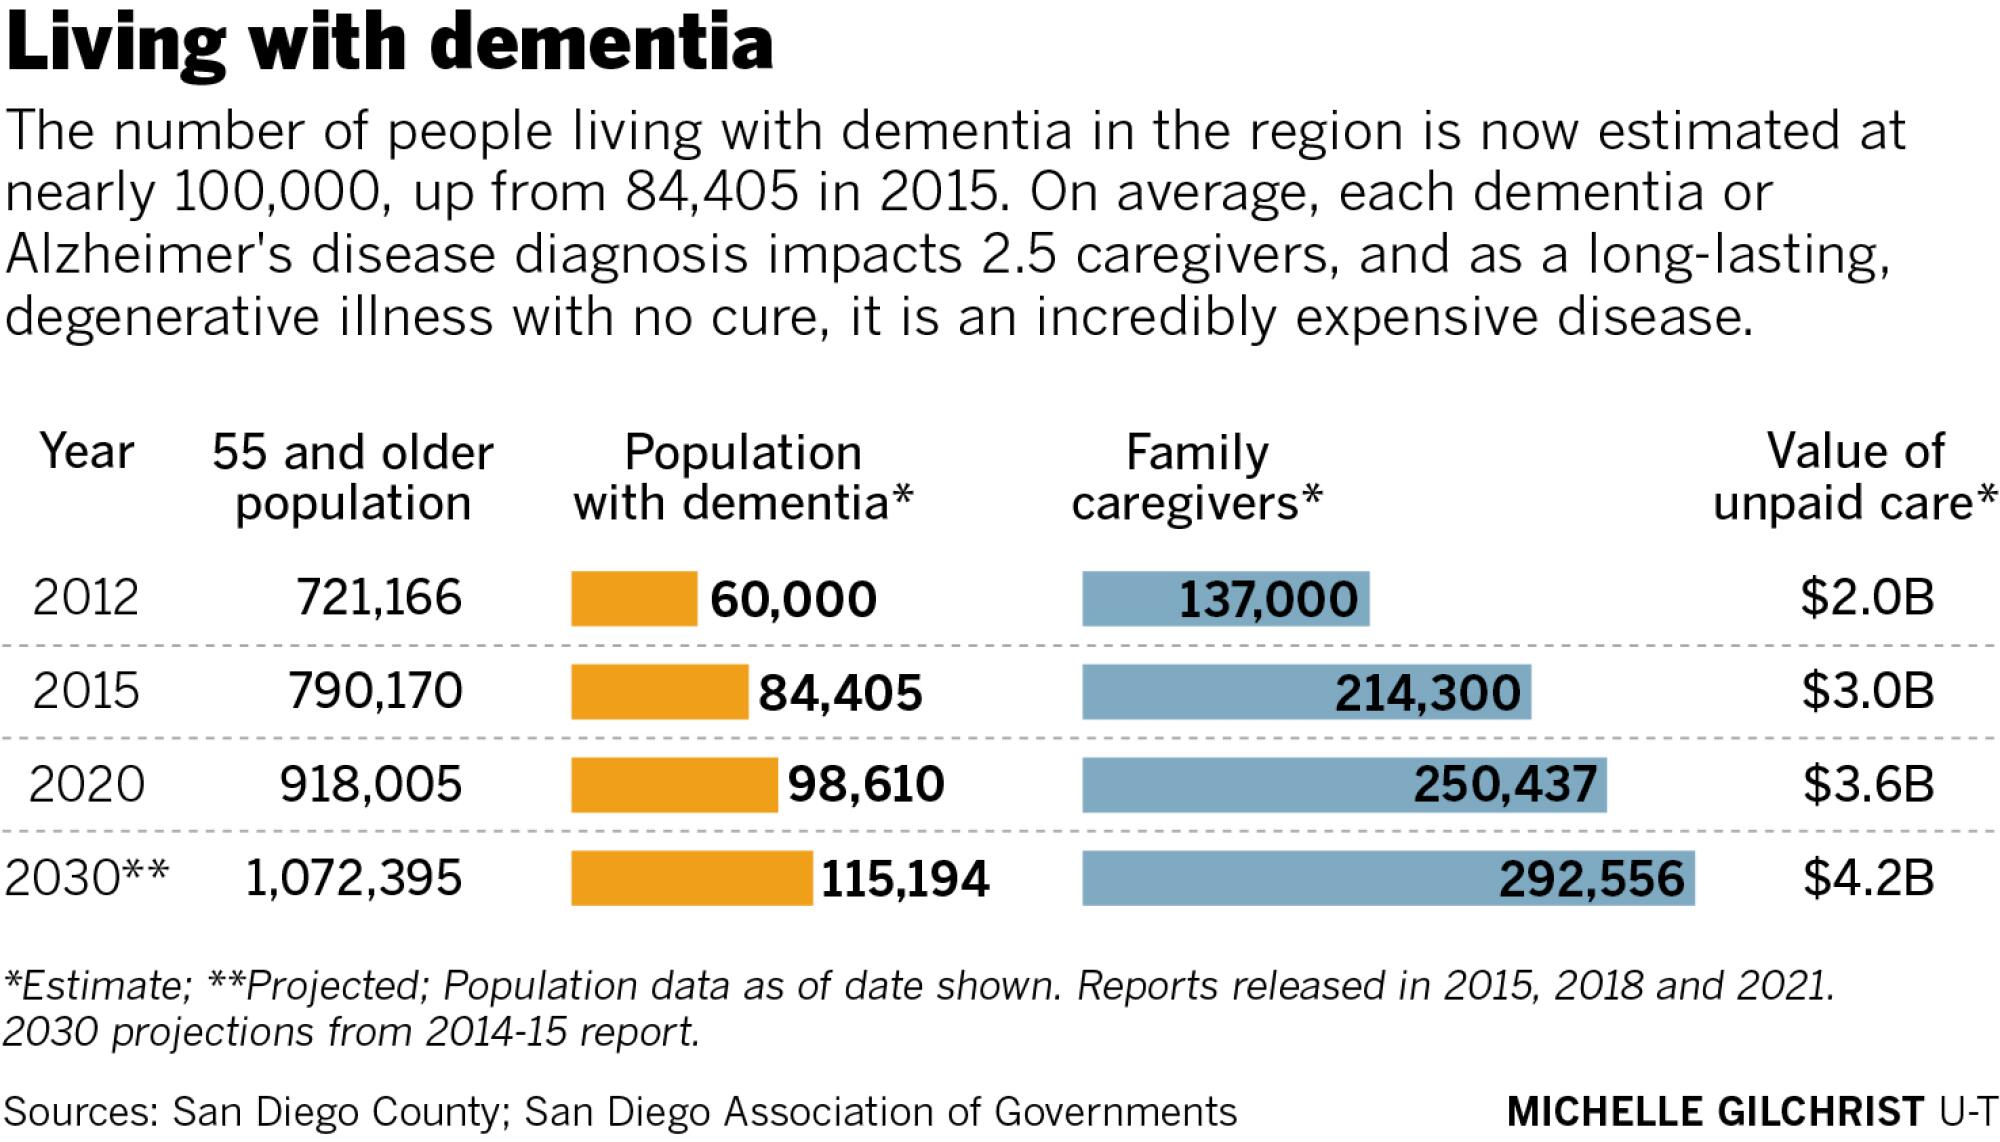 The number of people living with dementia in the region is estimated at 100,000